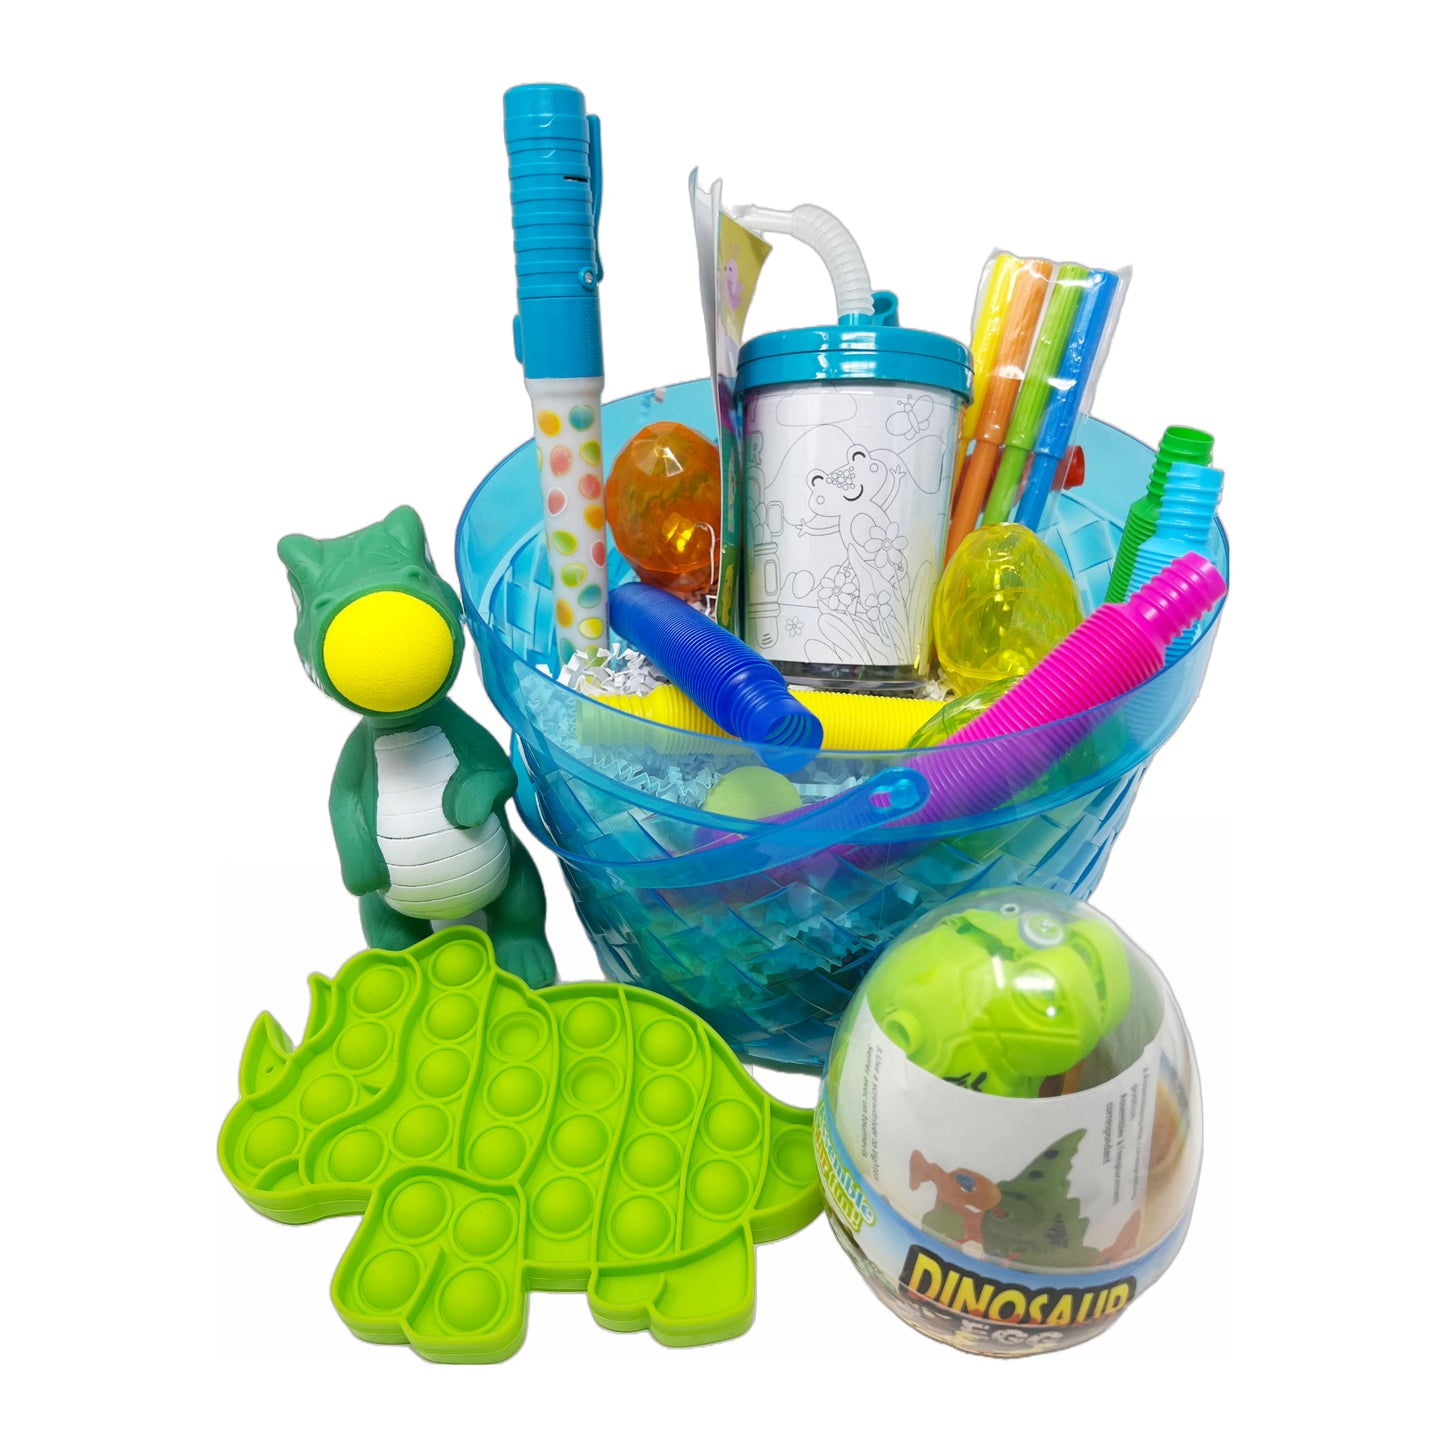 Cheep N Cheerful Build a Basket Boy, LED Basket with Novelty Toys Easter Basket Kit